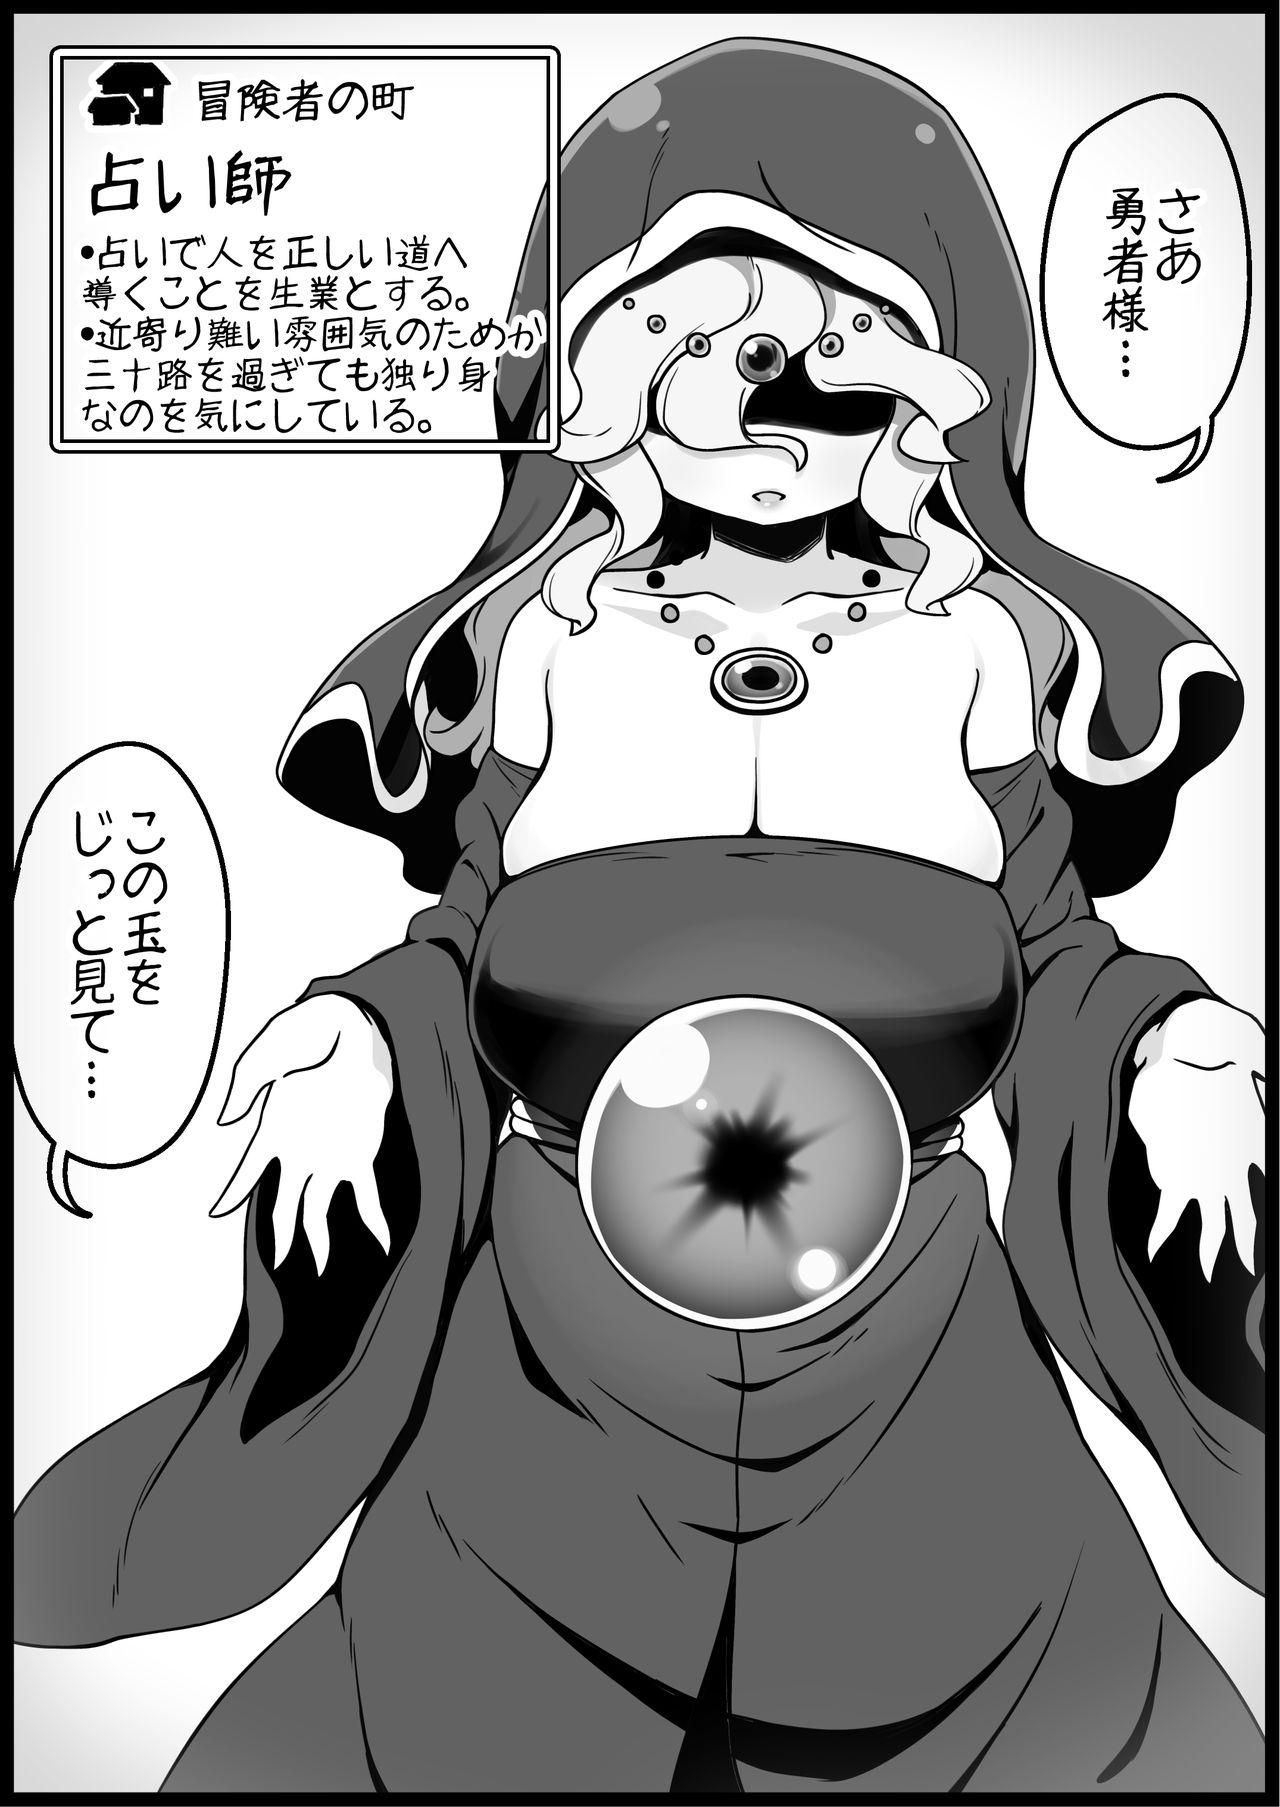 [Succubus Egg] Fantasy World 2 Too Forgiving to Heroes-Continued NPC (mob) Opponent-Centered Short H Manga Collection- 5